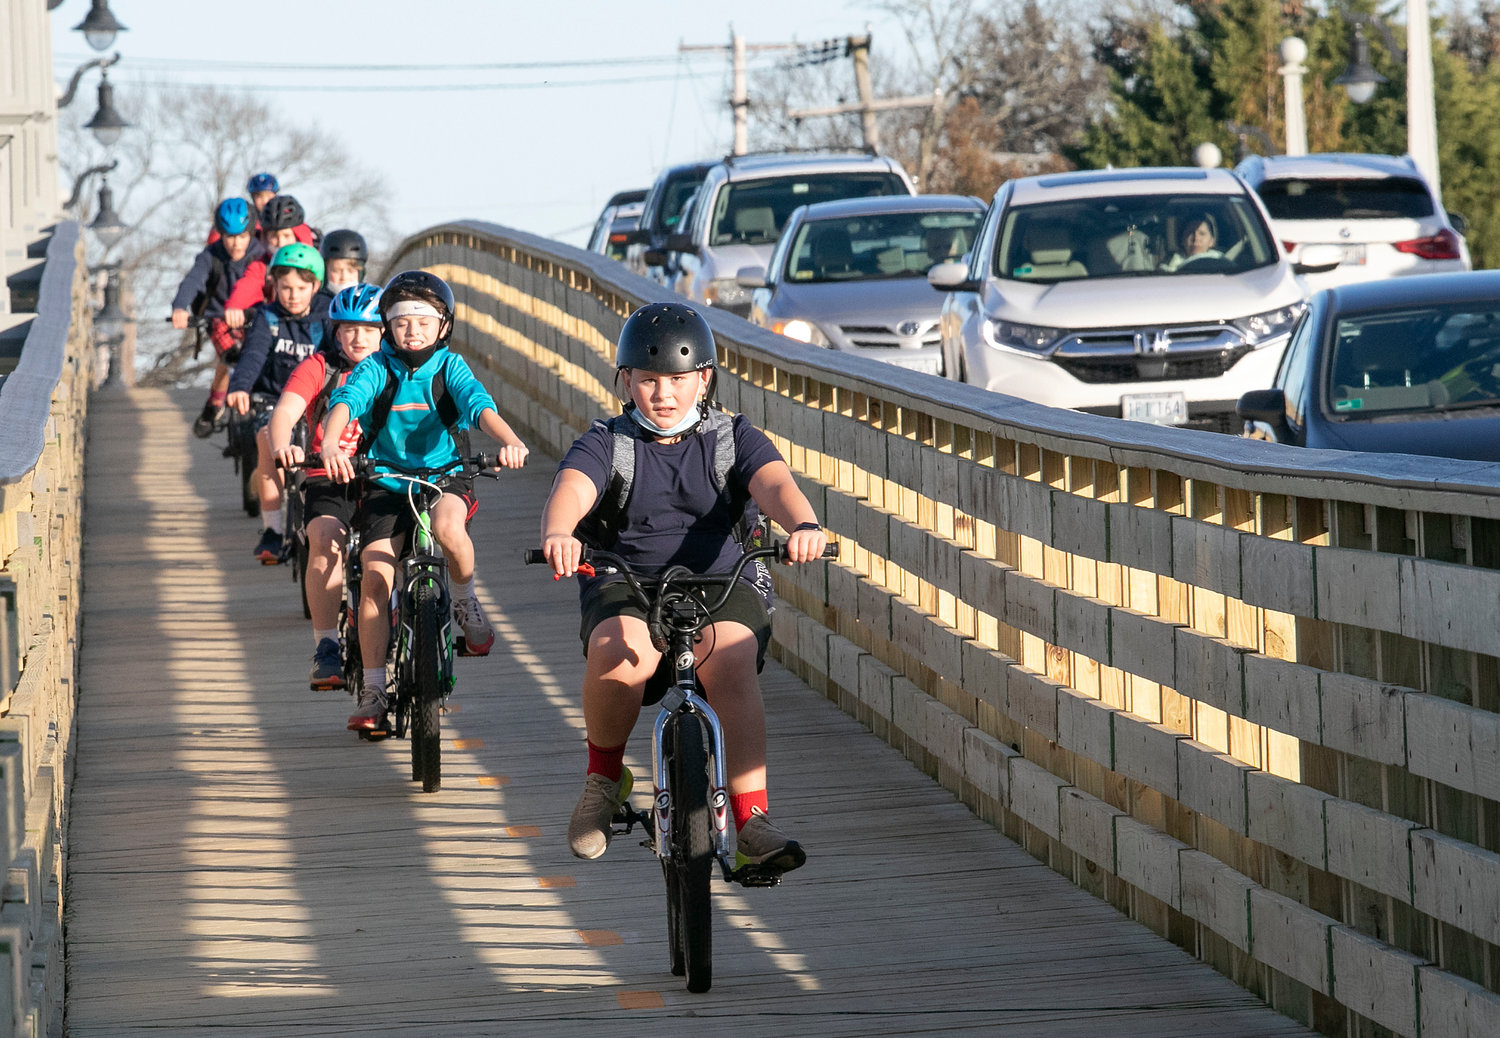 Students from Hampden Meadows School ride over the wooden boardwalk on the Barrington River Bridge on Friday afternoon.